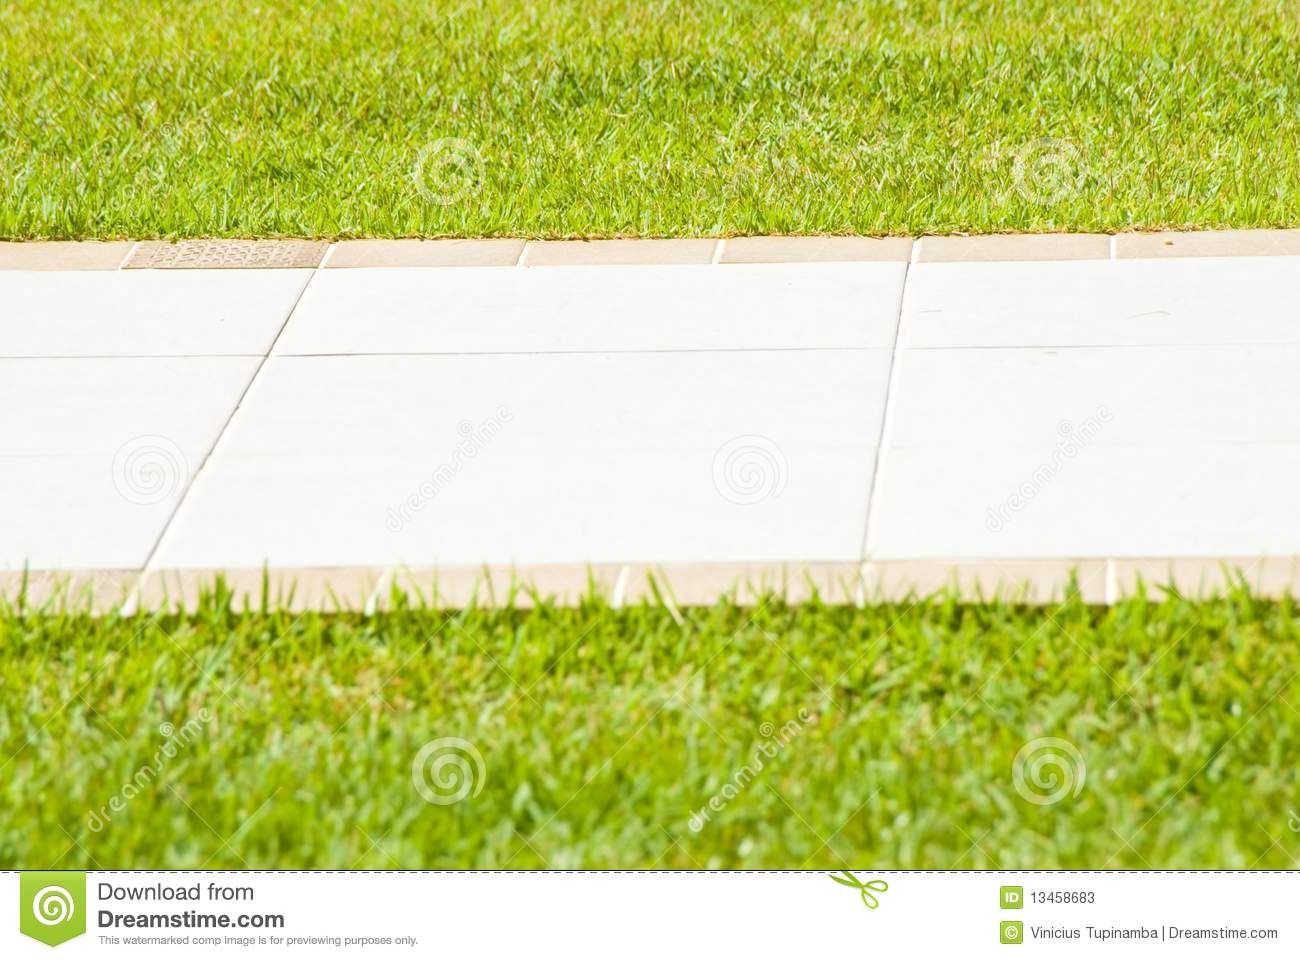 Sidewalk In The Grass Stock Photos   Image  13458683